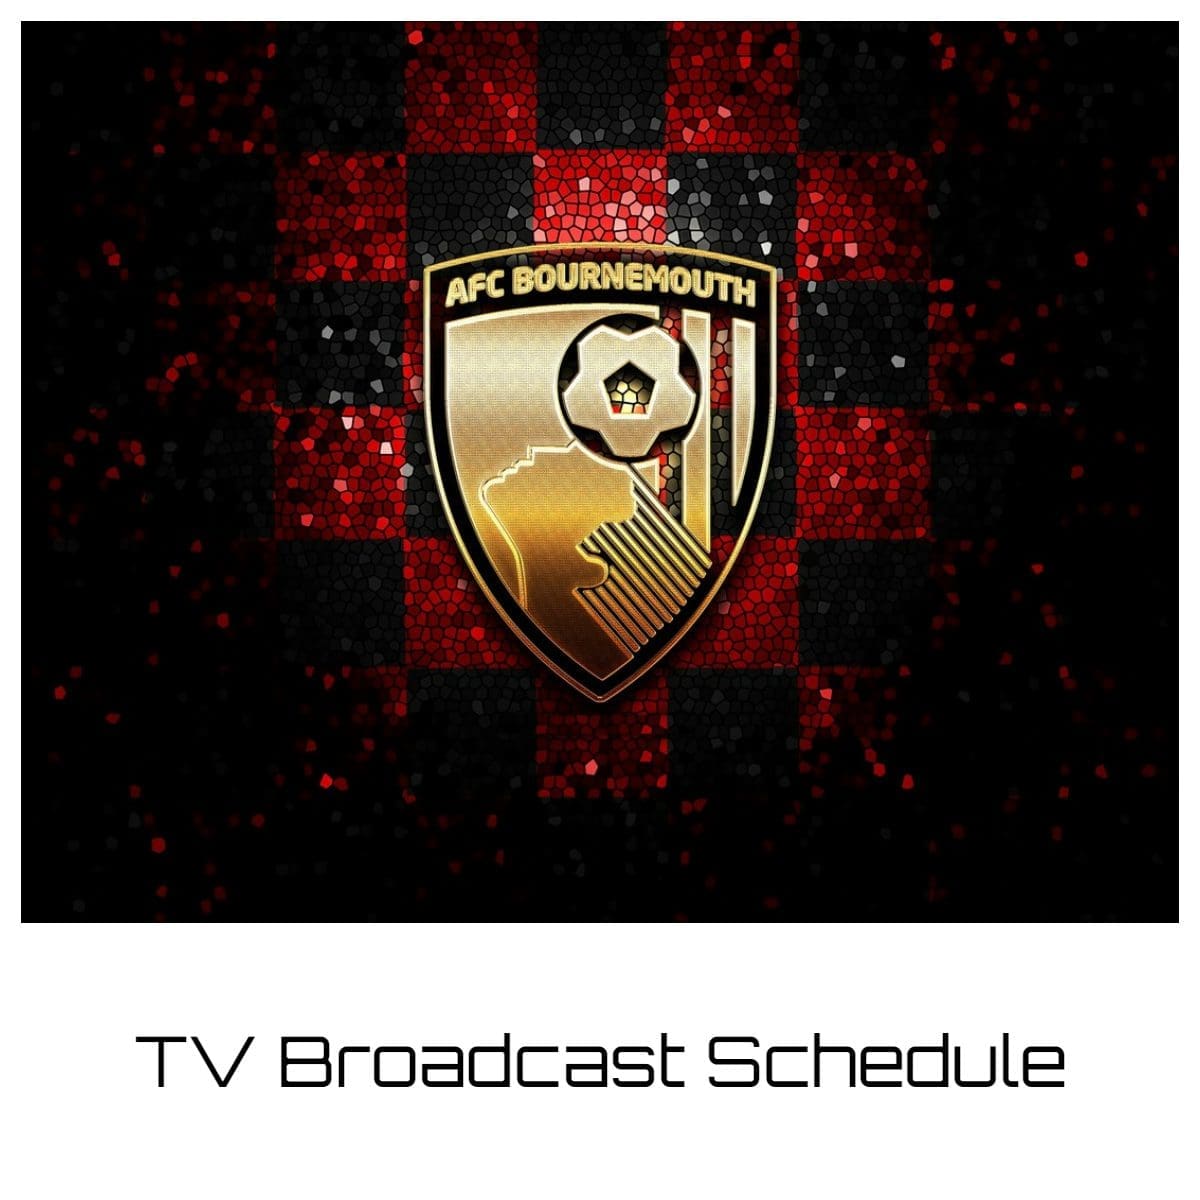 Bournemouth TV Broadcast Schedule